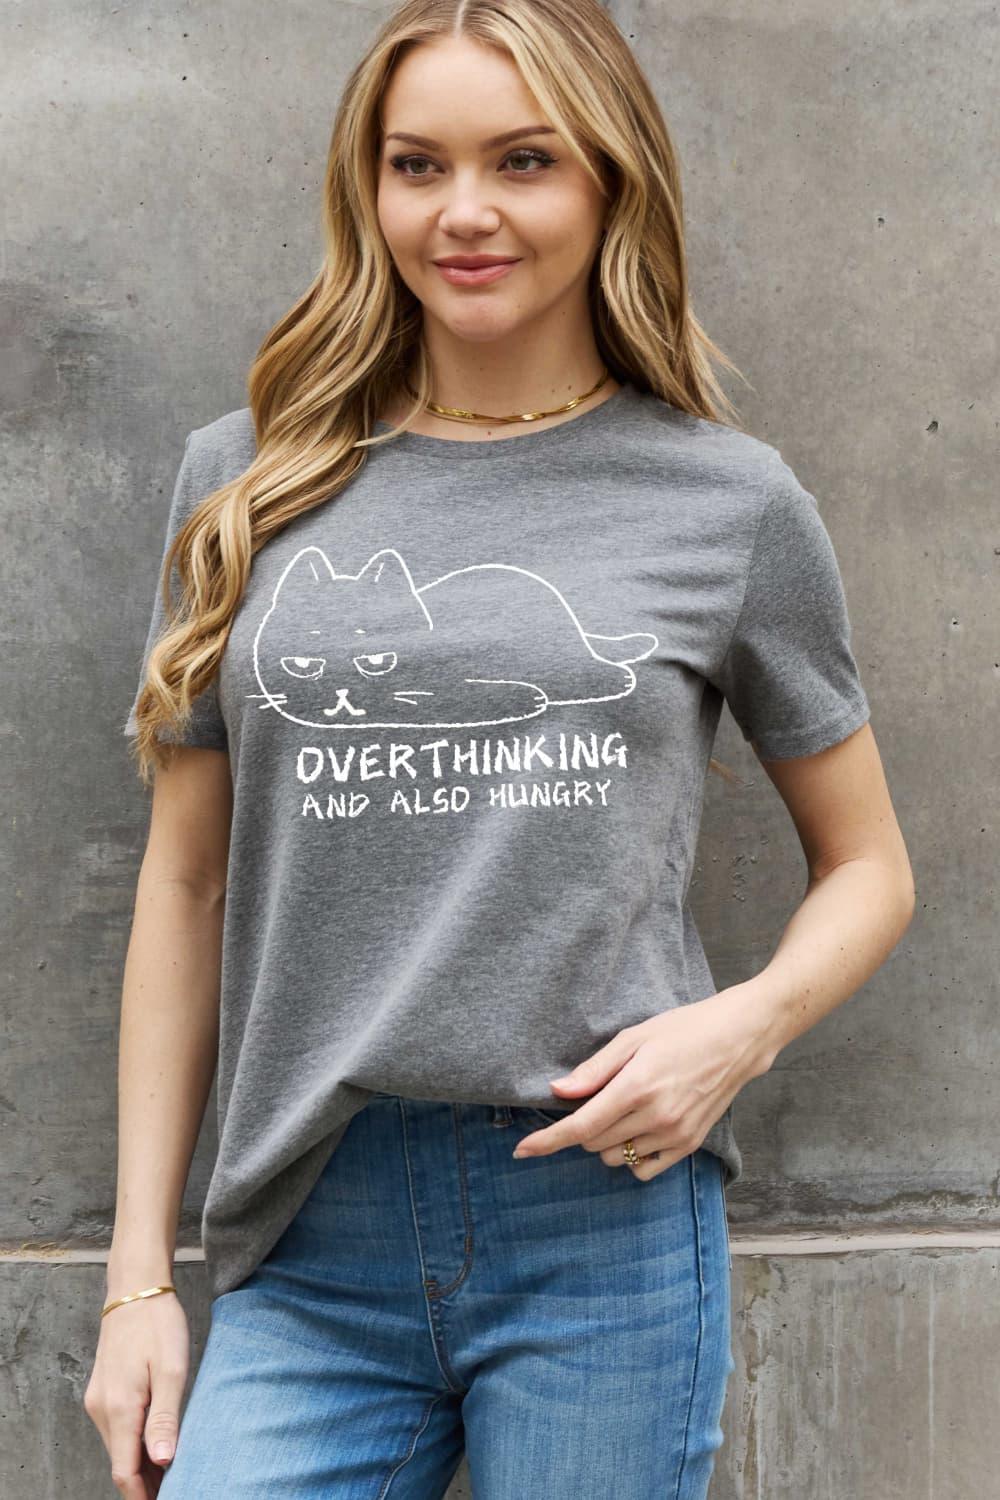 Full Size OVERTHINKING AND ALSO HUNGRY Graphic Cotton Tee - Olive Ave